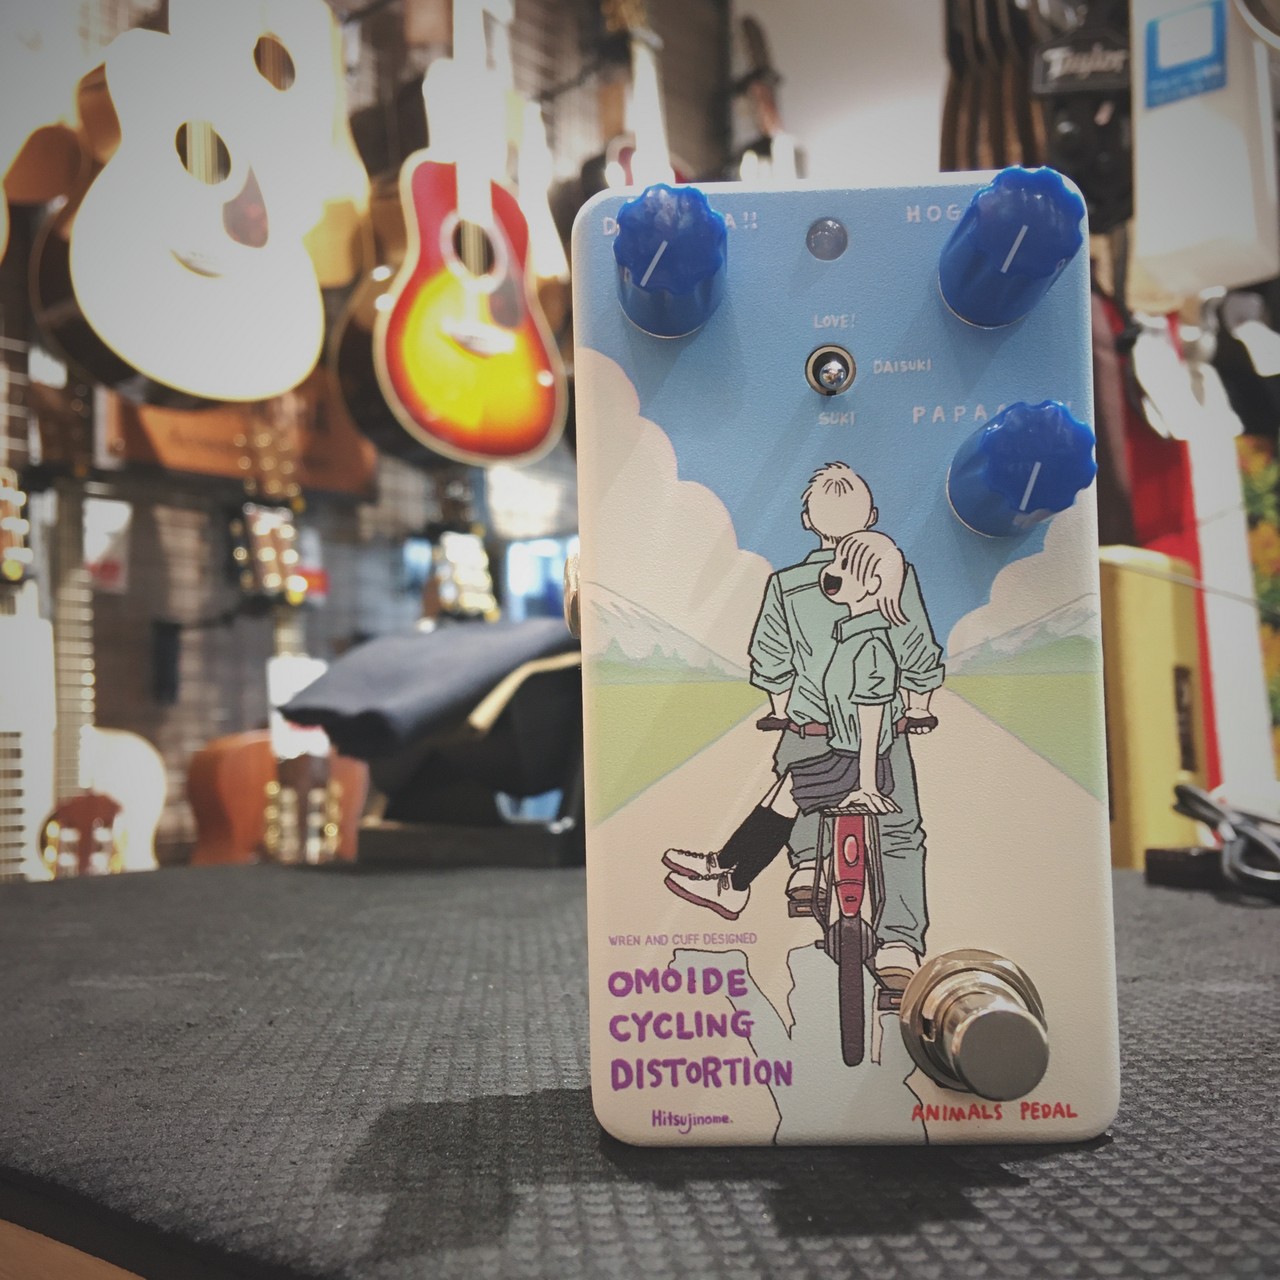 Animals Pedal OMOIDE CYCLING DISTORTION-